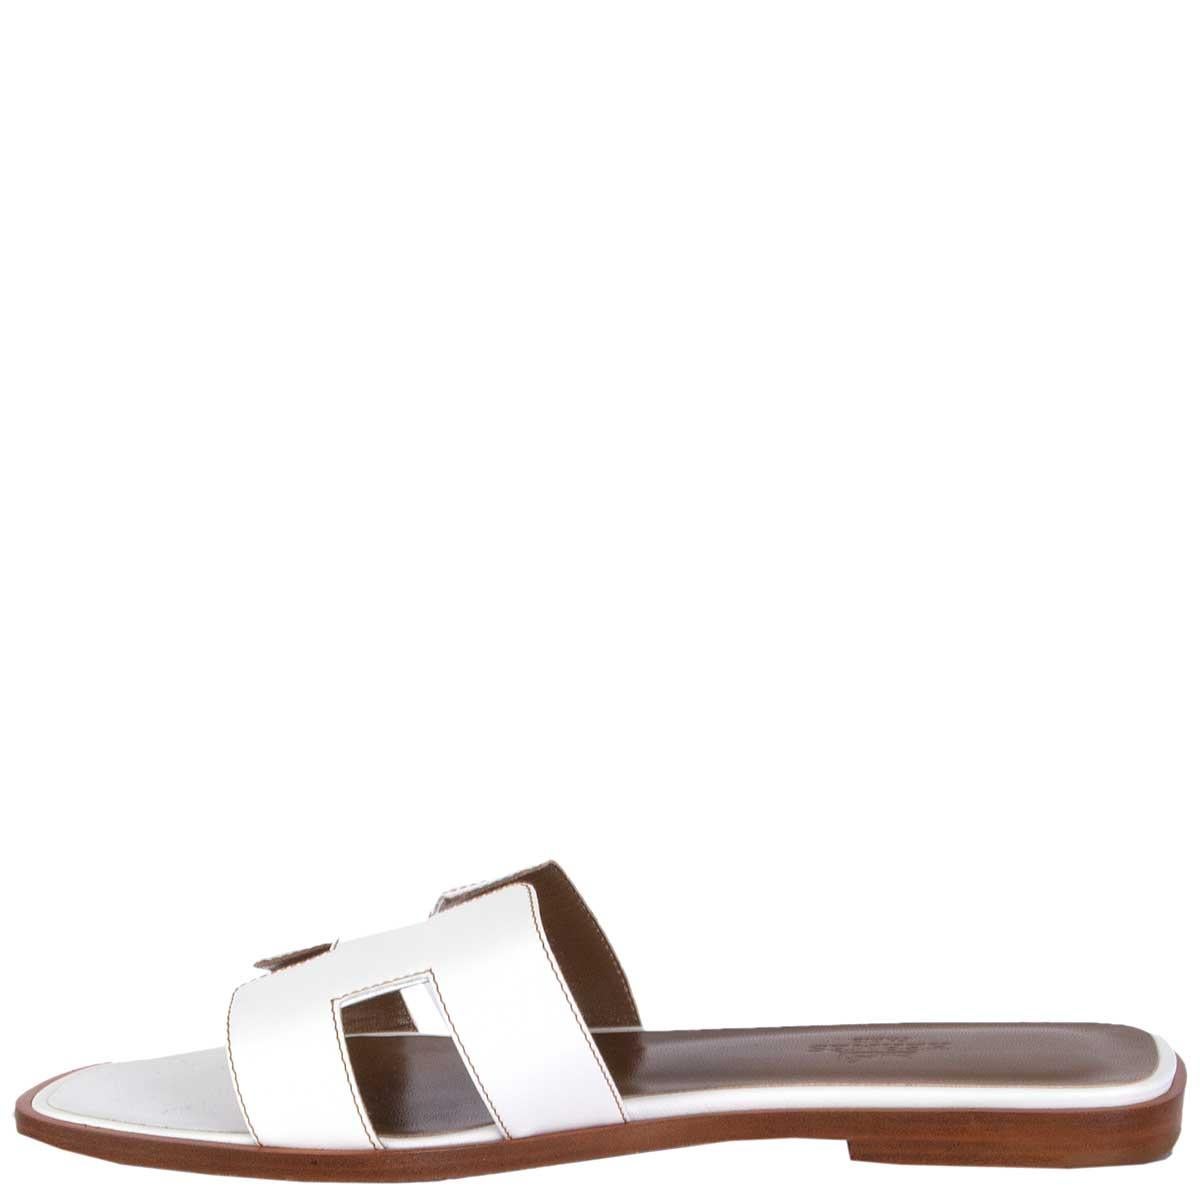 Brown HERMES white leather ORAN Flat Slides Sandals Shoes 37